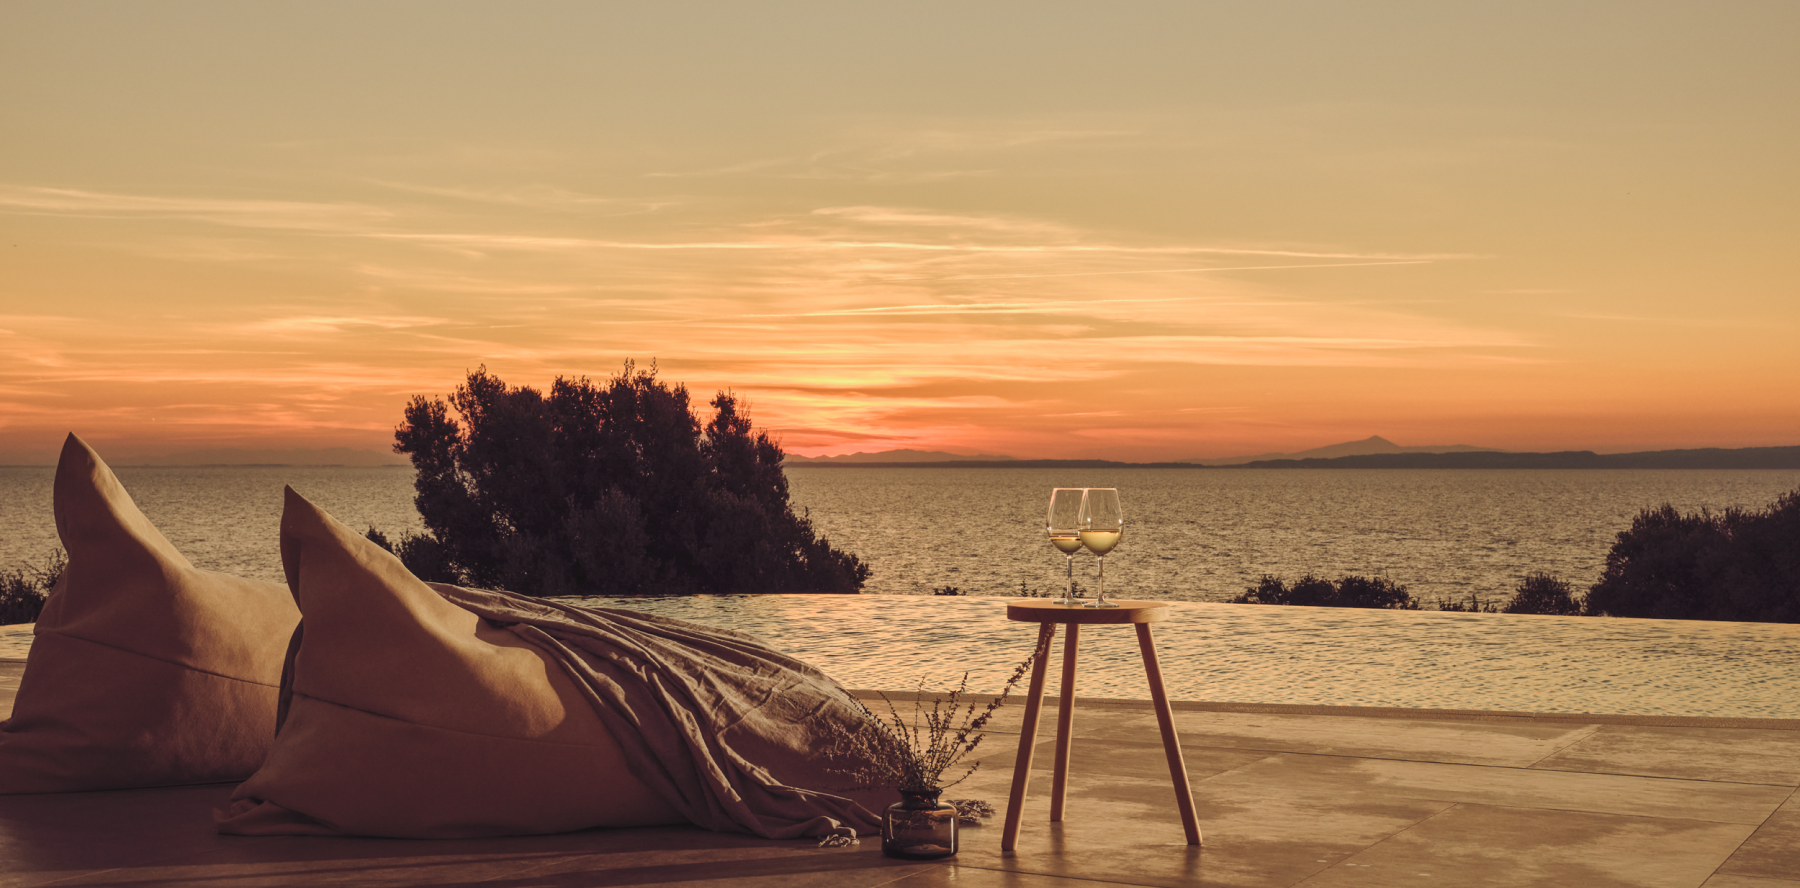 A glass of wine on a chair by the ocean at sunset, creating a serene and relaxing ambiance.